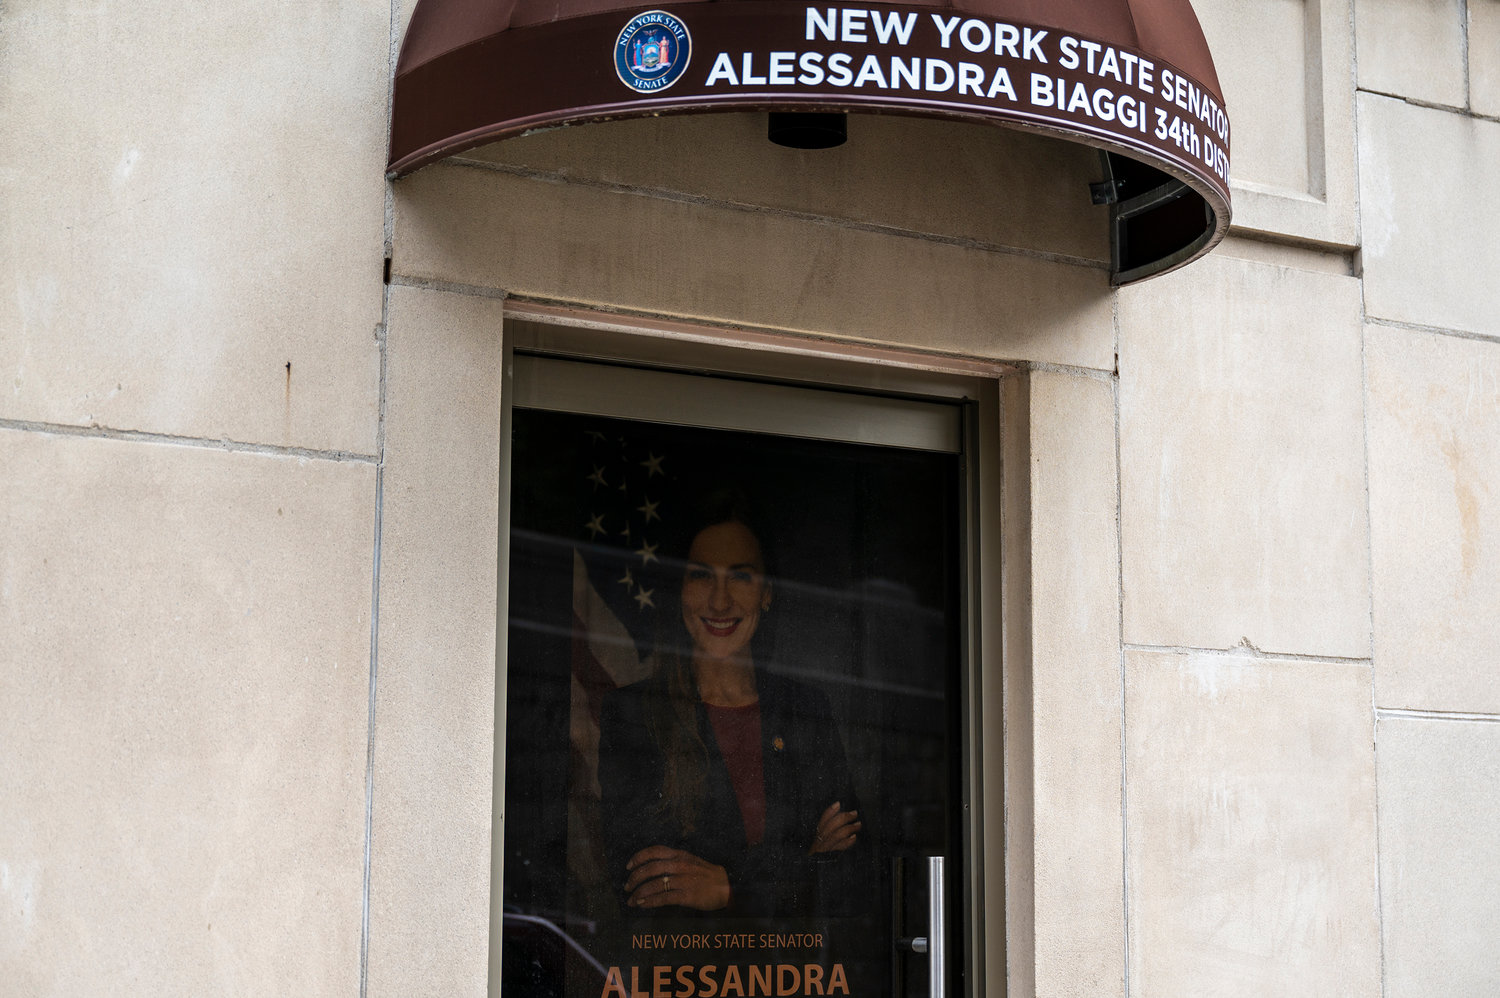 A view inside New York state Sen. Alessandra Biaggi district office on Sept. 7. Since the beginning of the pandemic, the senator’s office has been closed to walk-in services.